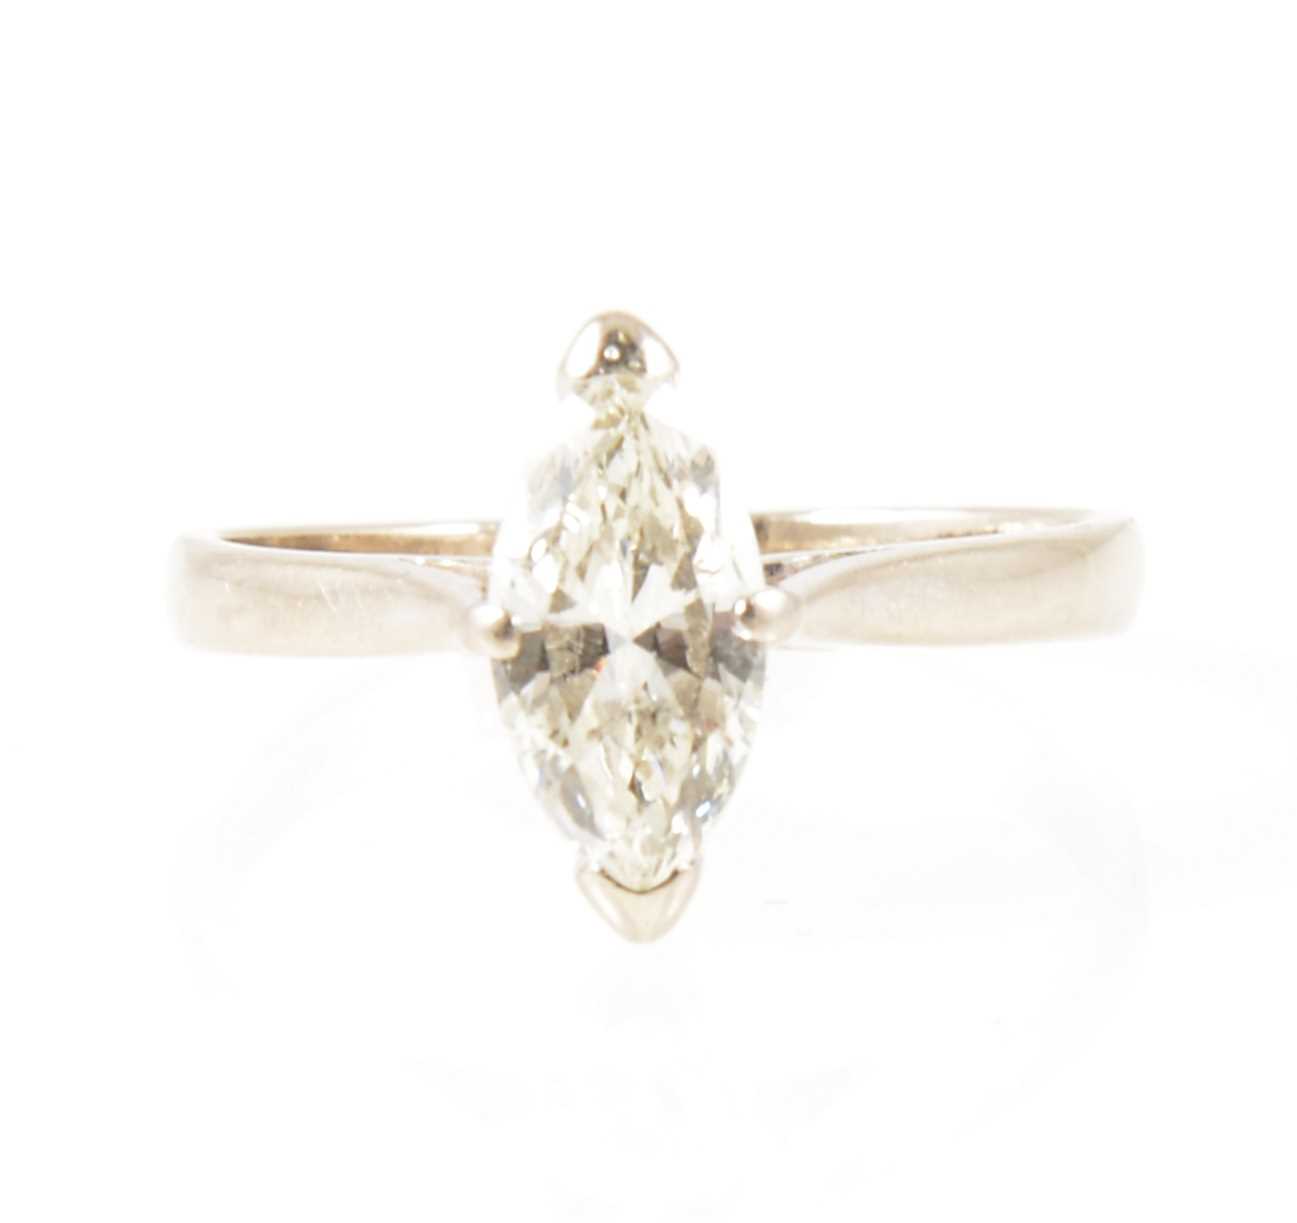 Lot 5 - A diamond solitaire ring